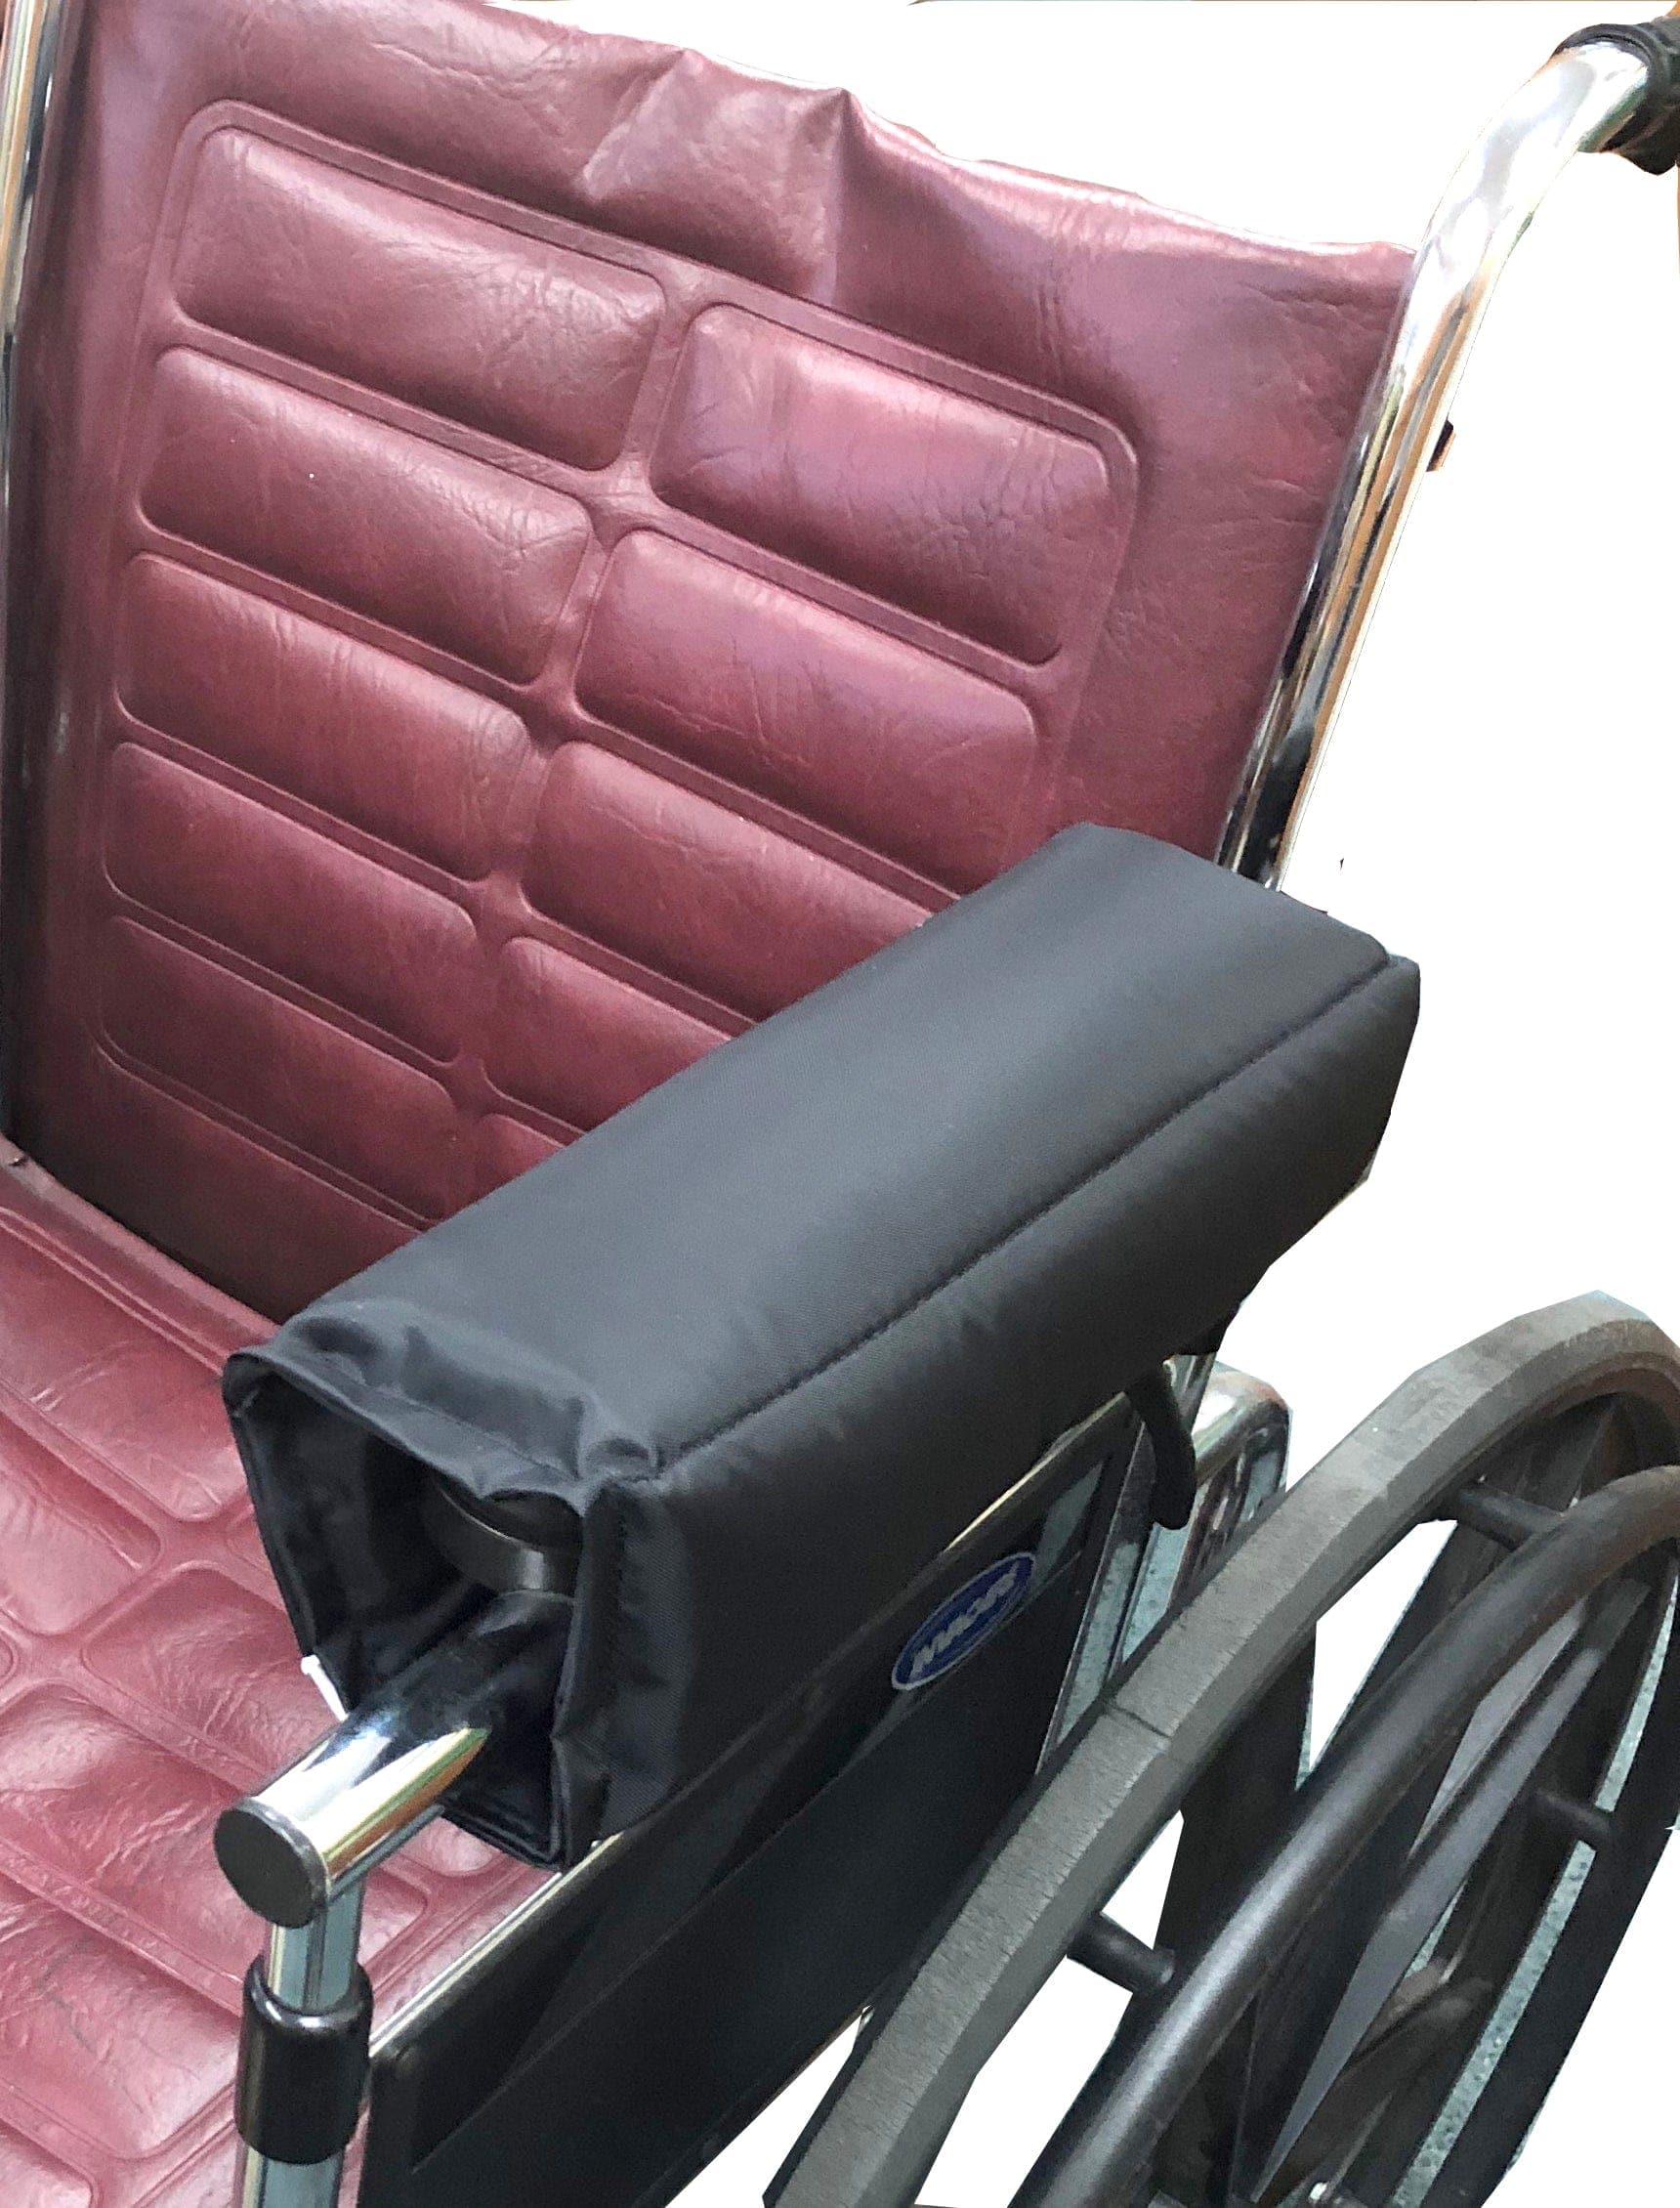 SkilCare Wheelchair accessories 11" SkilCare Wheelchair Foam Padded Nylon Full Armrest Pads